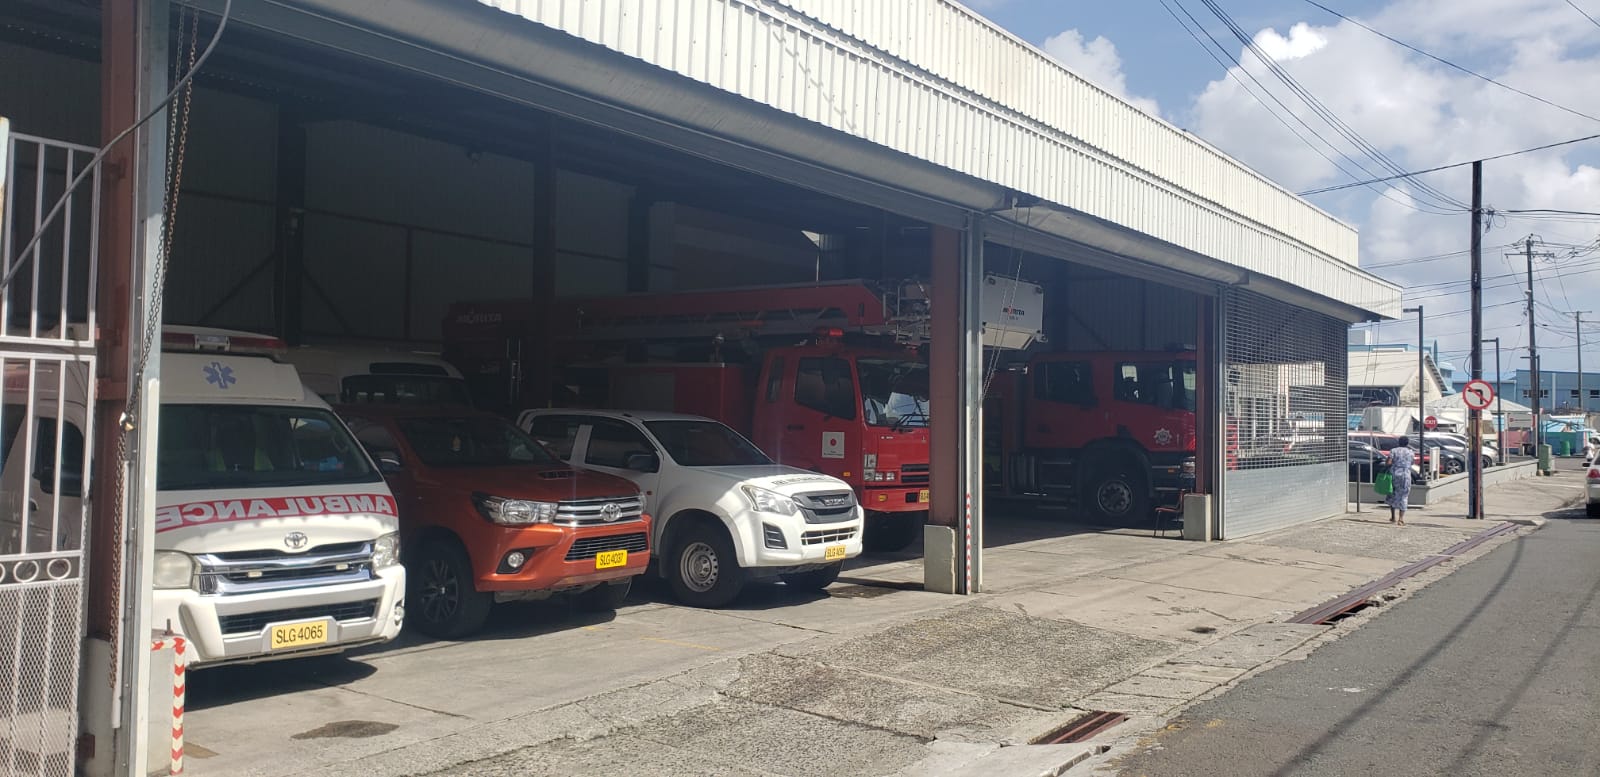 Saint Lucia Fire Service Issues Imposter Alert